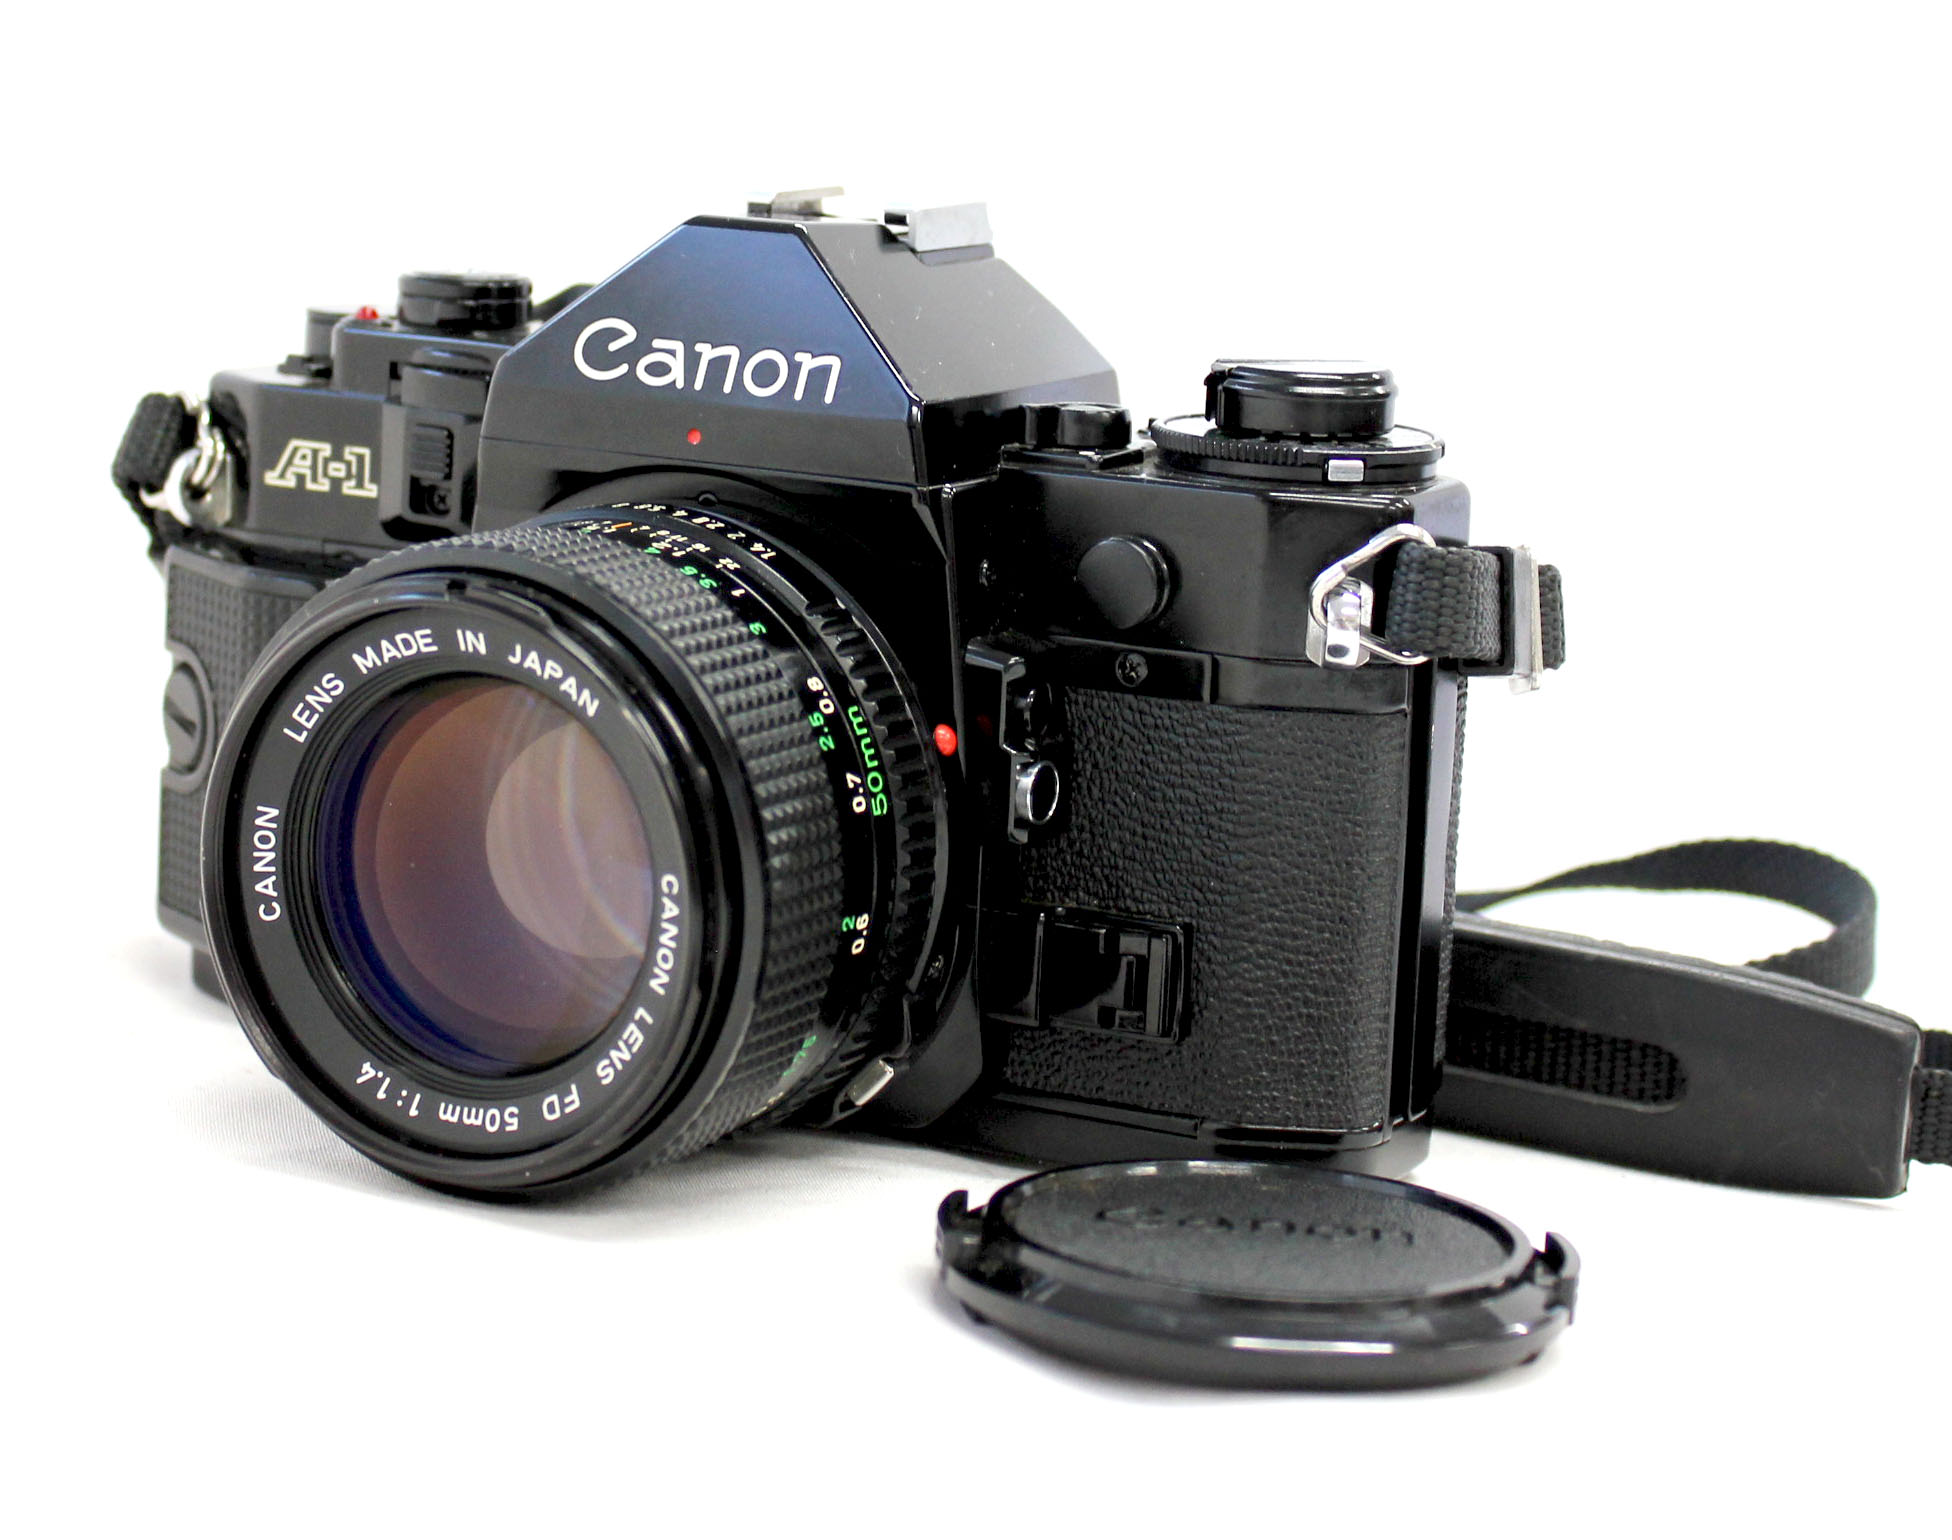 Japan Used Camera Shop | Canon A-1 35mm SLR Film Camera with New FD NFD 50mm F/1.4 Lens from Japan